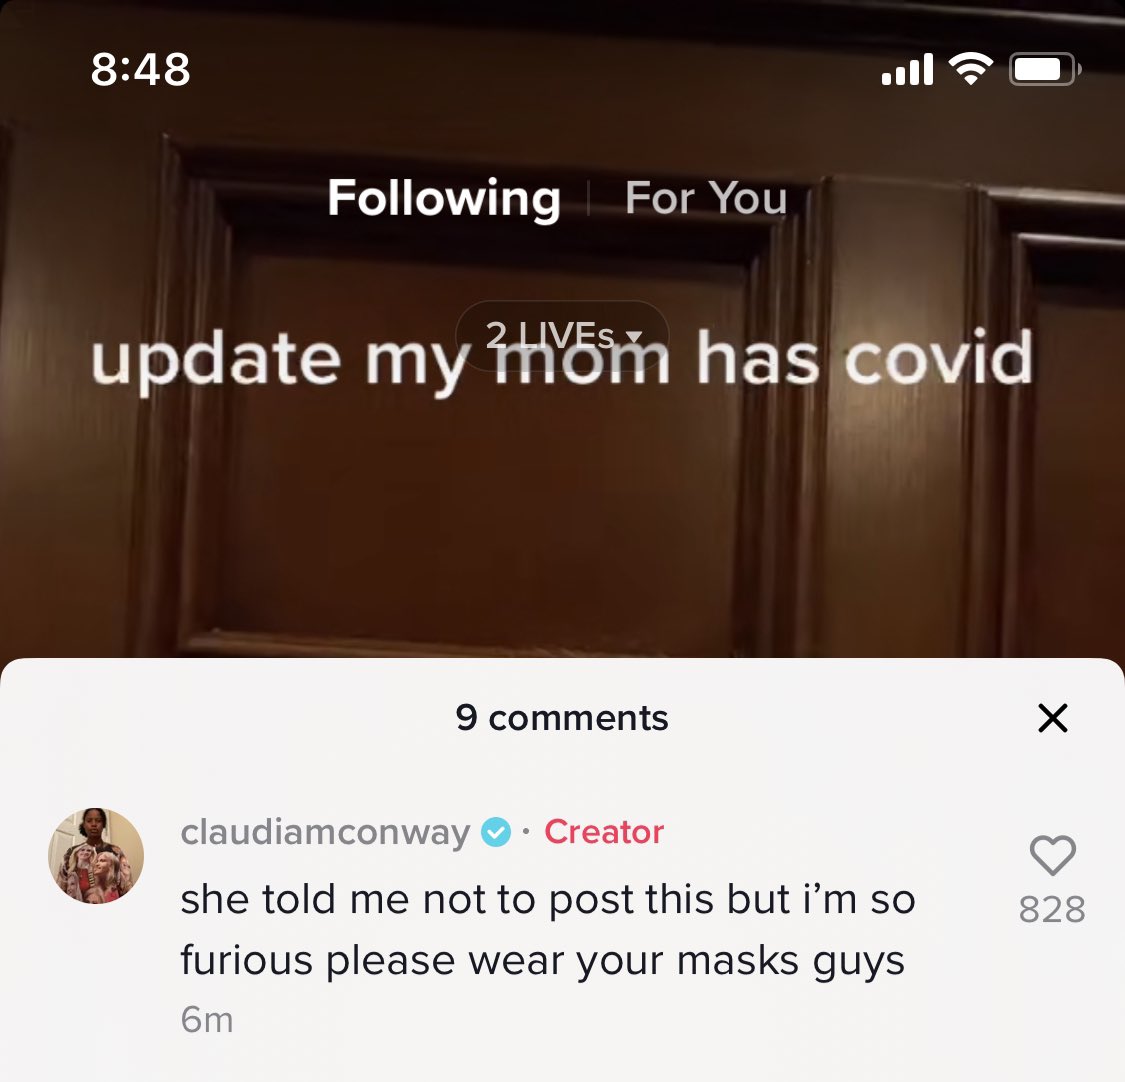 Claudia Conway also commented that her mother asked her not to post the information and added a plea for people to wear masks: